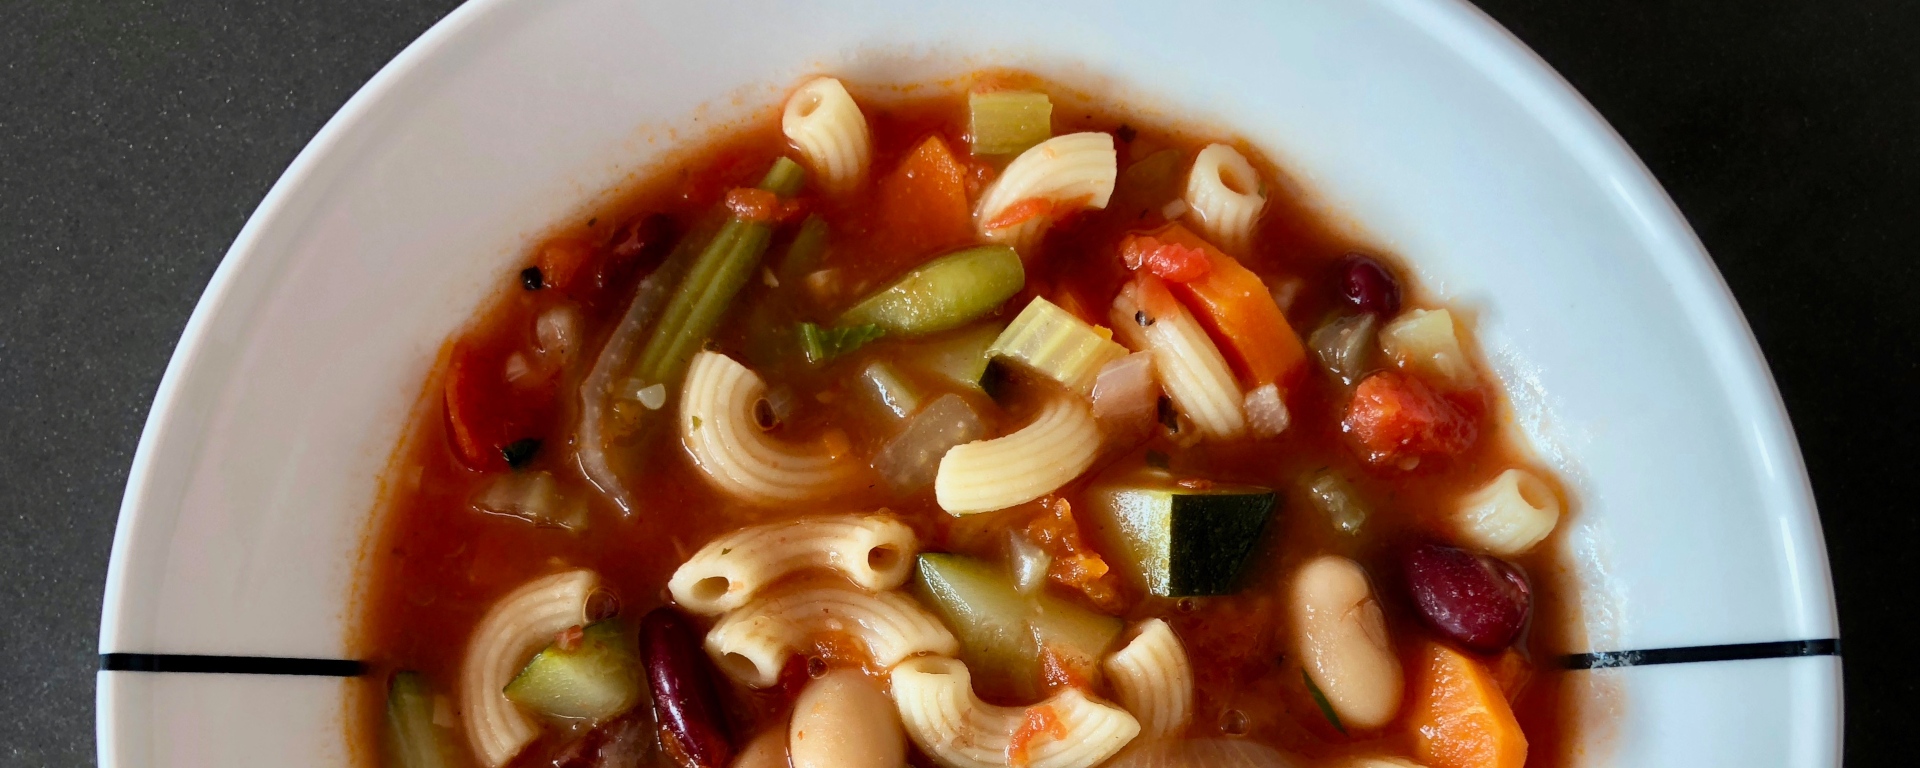 Minestrone Meal Soup